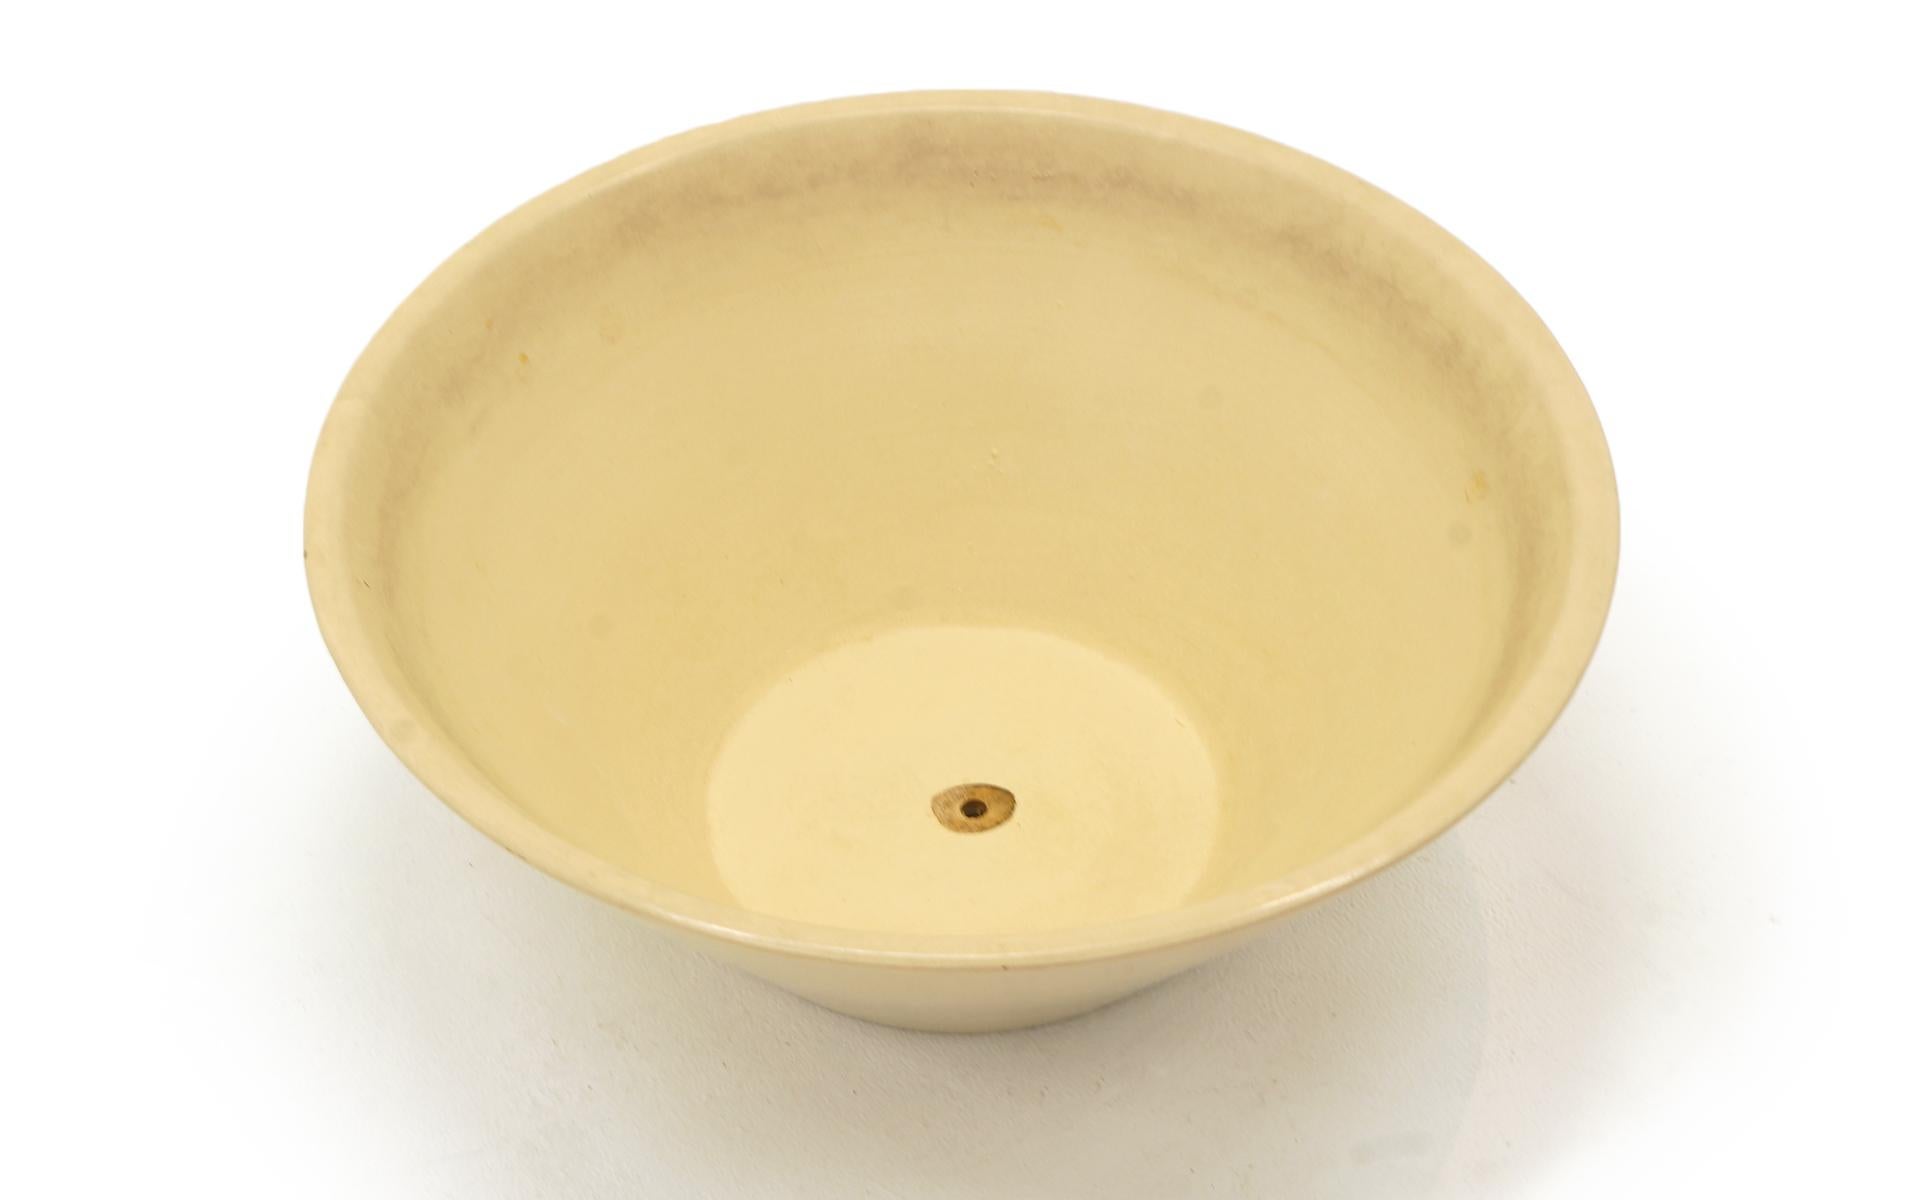 Mid-Century Modern Wok Planter by Legardo Tackett for Architectural Pottery, Ready to Use